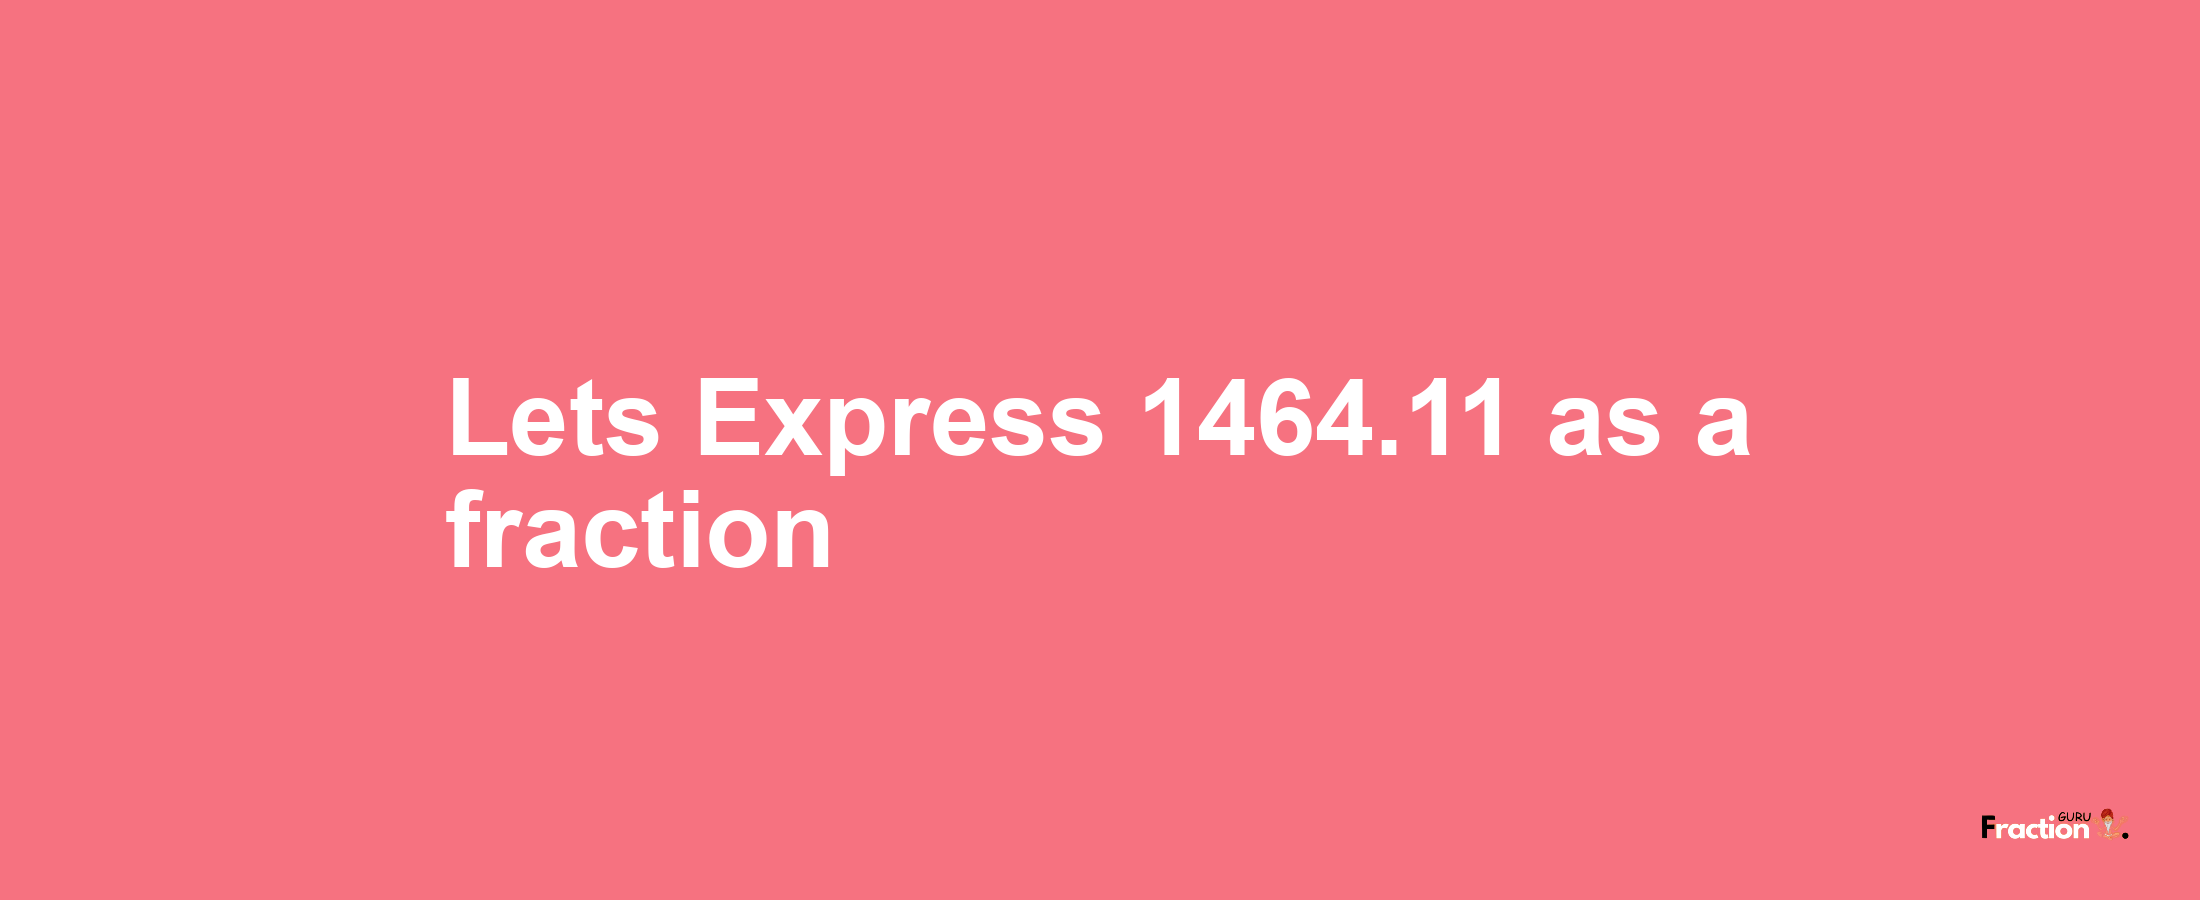 Lets Express 1464.11 as afraction